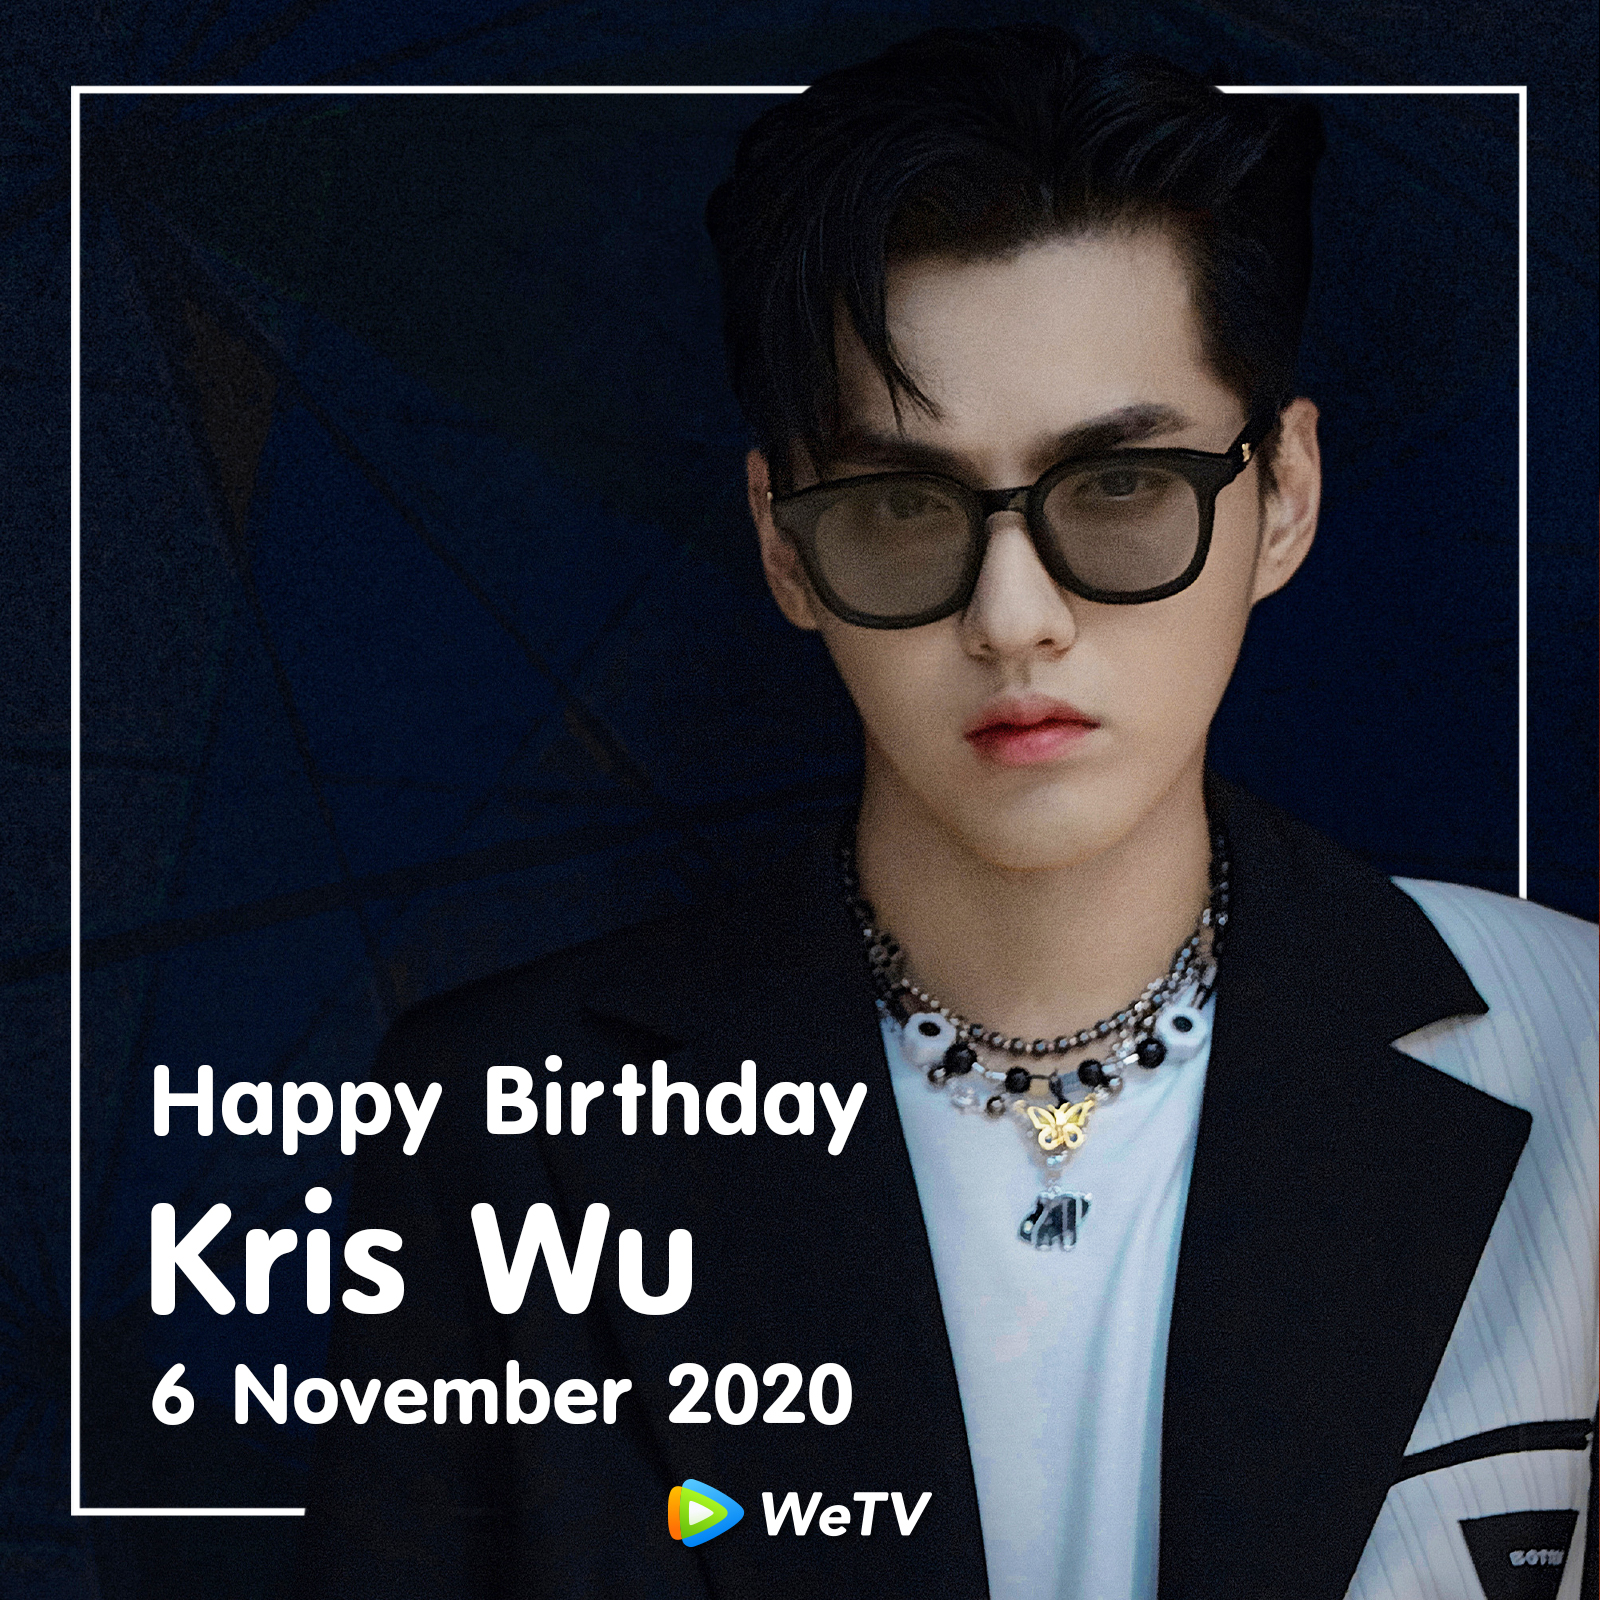 WeTV Philippines on X: 🎂 HAPPY BIRTHDAY TO Kris Wu 🎂 We wish him a  happy birthday and let's say happy birthday to him here! 🤗🤗 Watch and  stay tuned for her